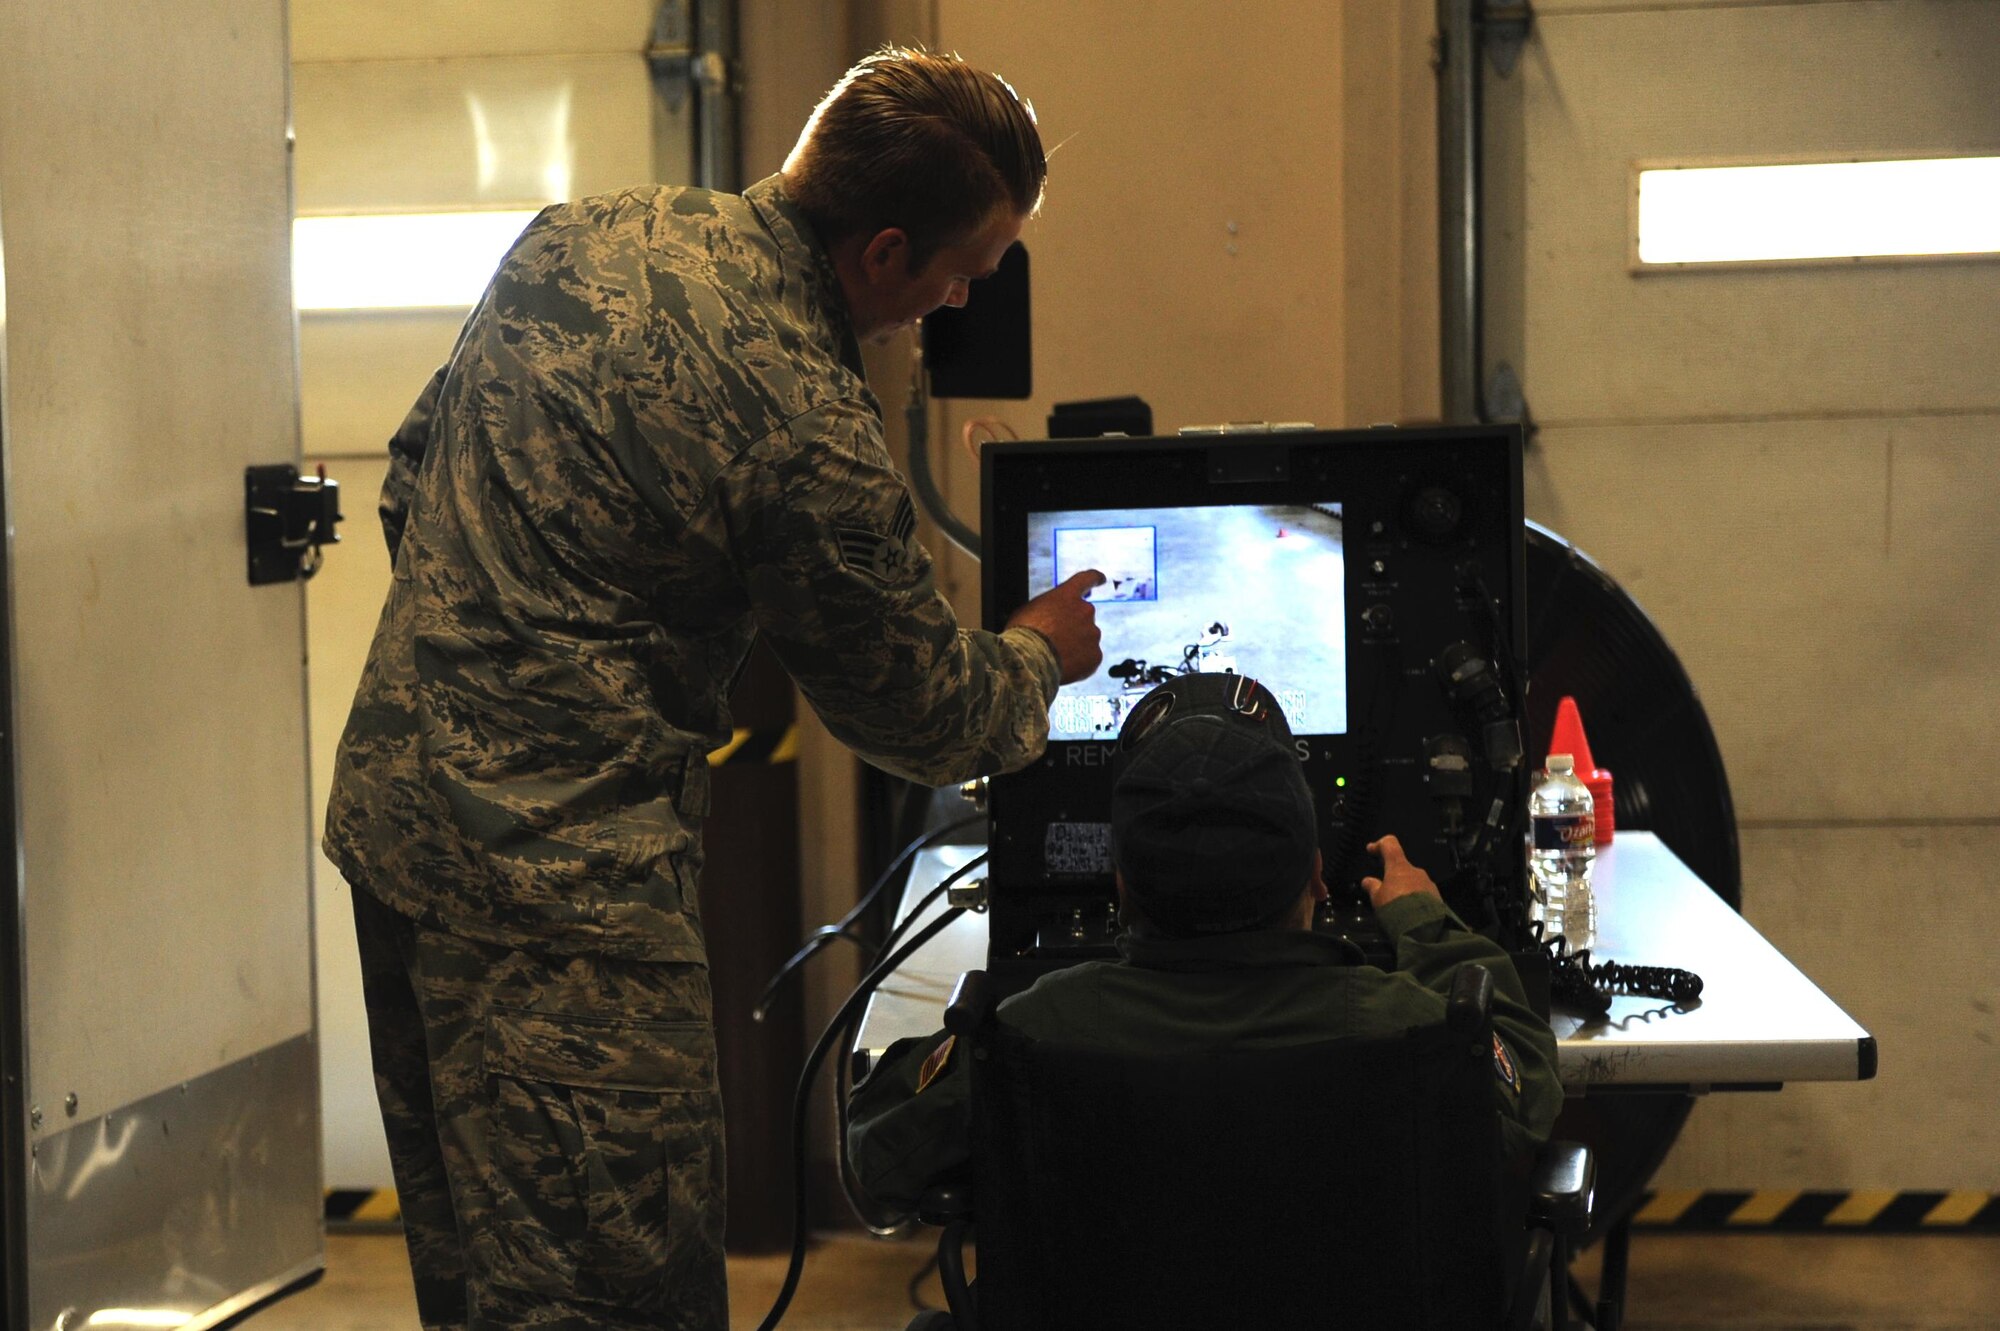 (From left) U.S. Air Force Senior Airman Htyler Kelly, 19th Civil Engineer Squadron Explosive Ordinance Disposal technician, explains how an EOD robot works to James Rogers, 17, during his Pilot for a Day visit Oct. 3, 2016, to Little Rock Air Force Base, Ark. Rogers received the tour as part of the Pilot for a Day program, which provides children who have serious or chronic illnesses an opportunity to be part of a flying squadron for an entire day. 